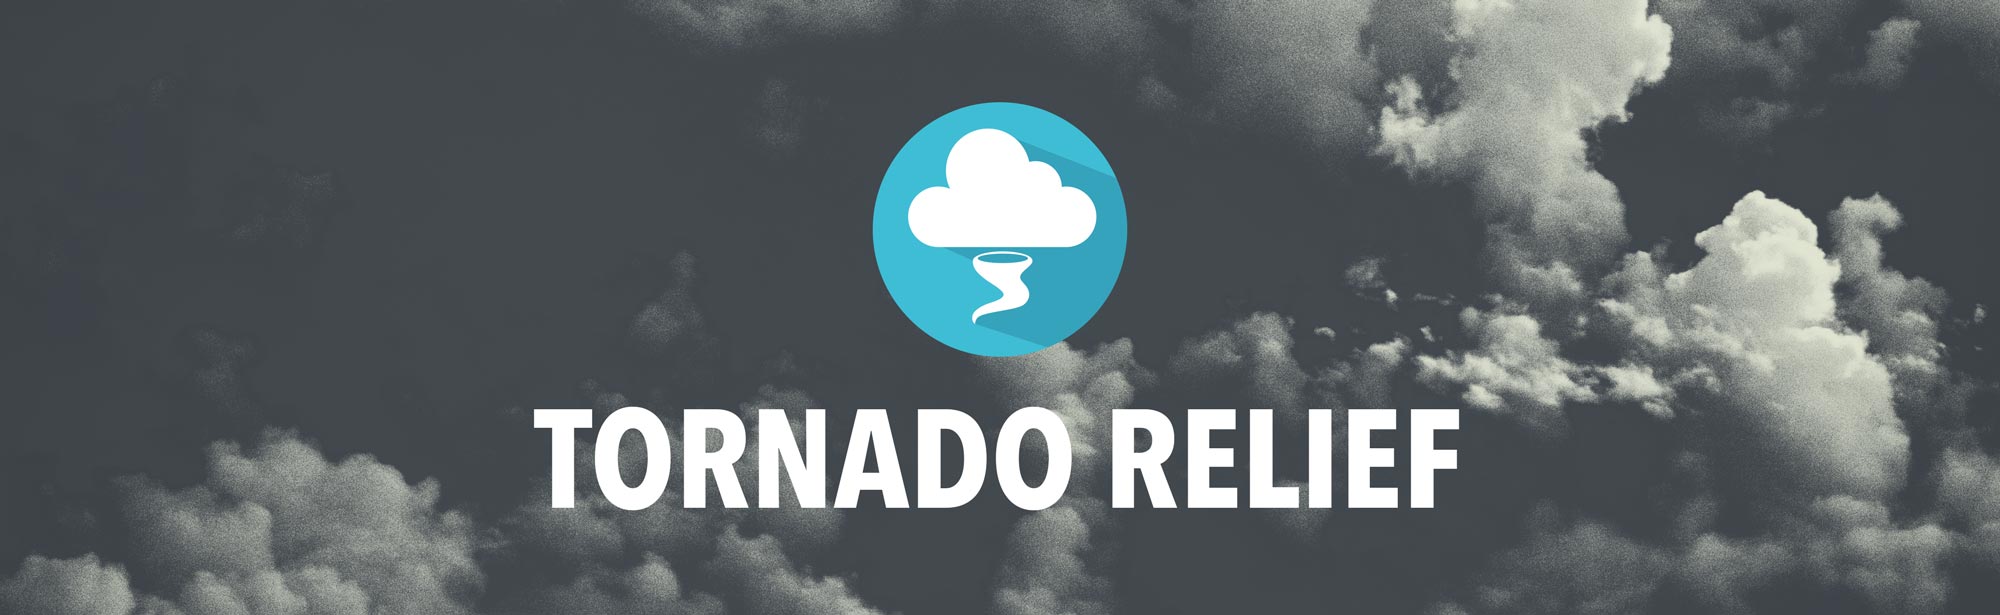 Tornado Relief Image - Inclement Weather Page Header - Grace Community Church